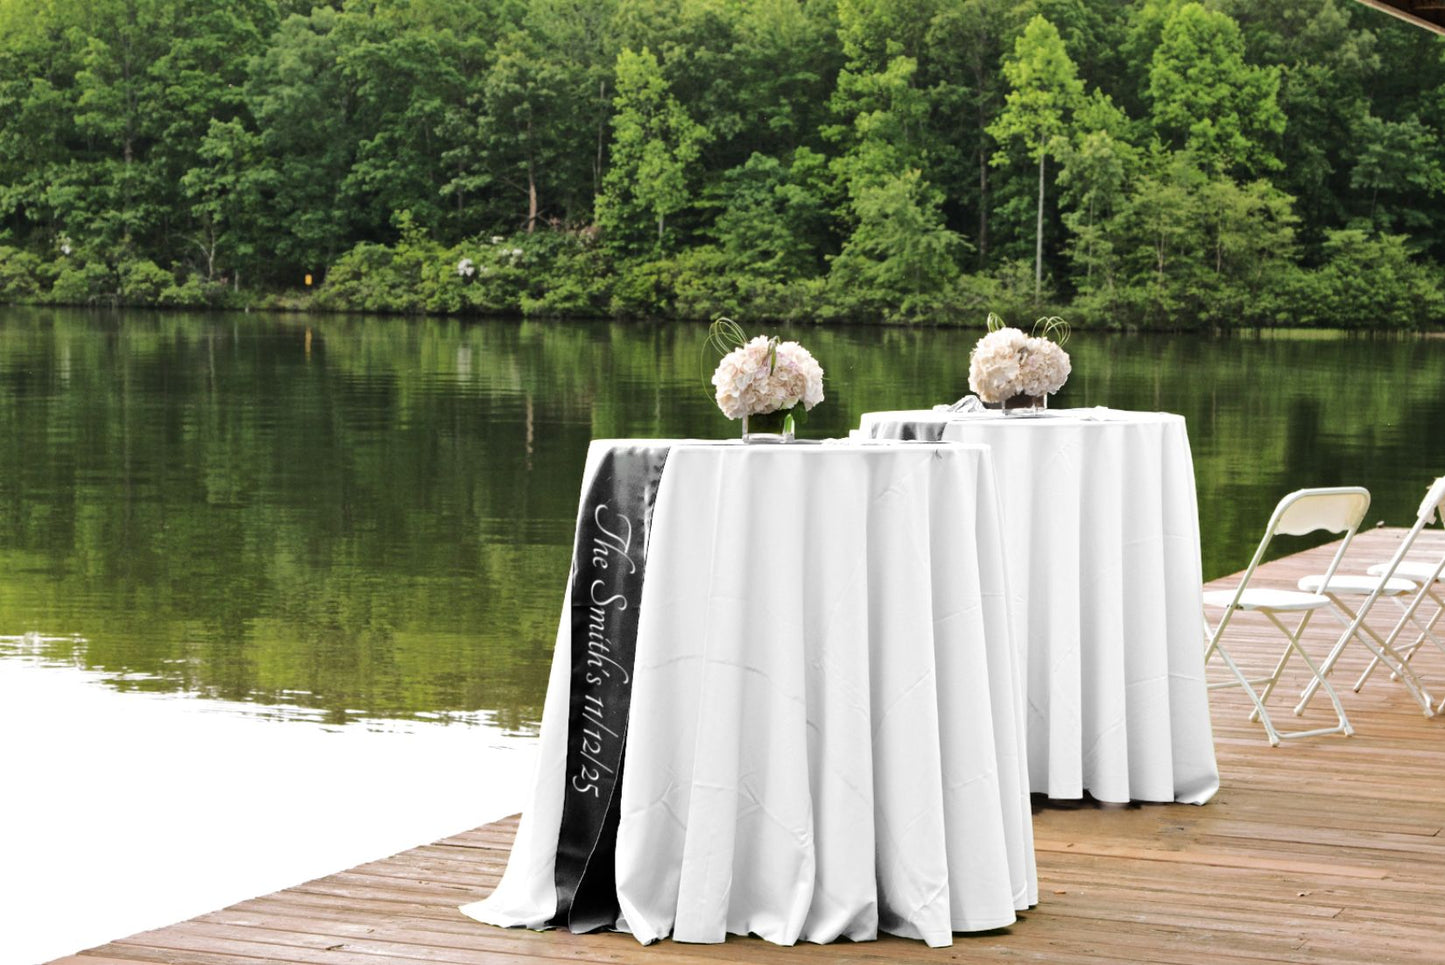 Cocktail table for rent. Table has personalized sash. To be used at wedding or other outdoor event.